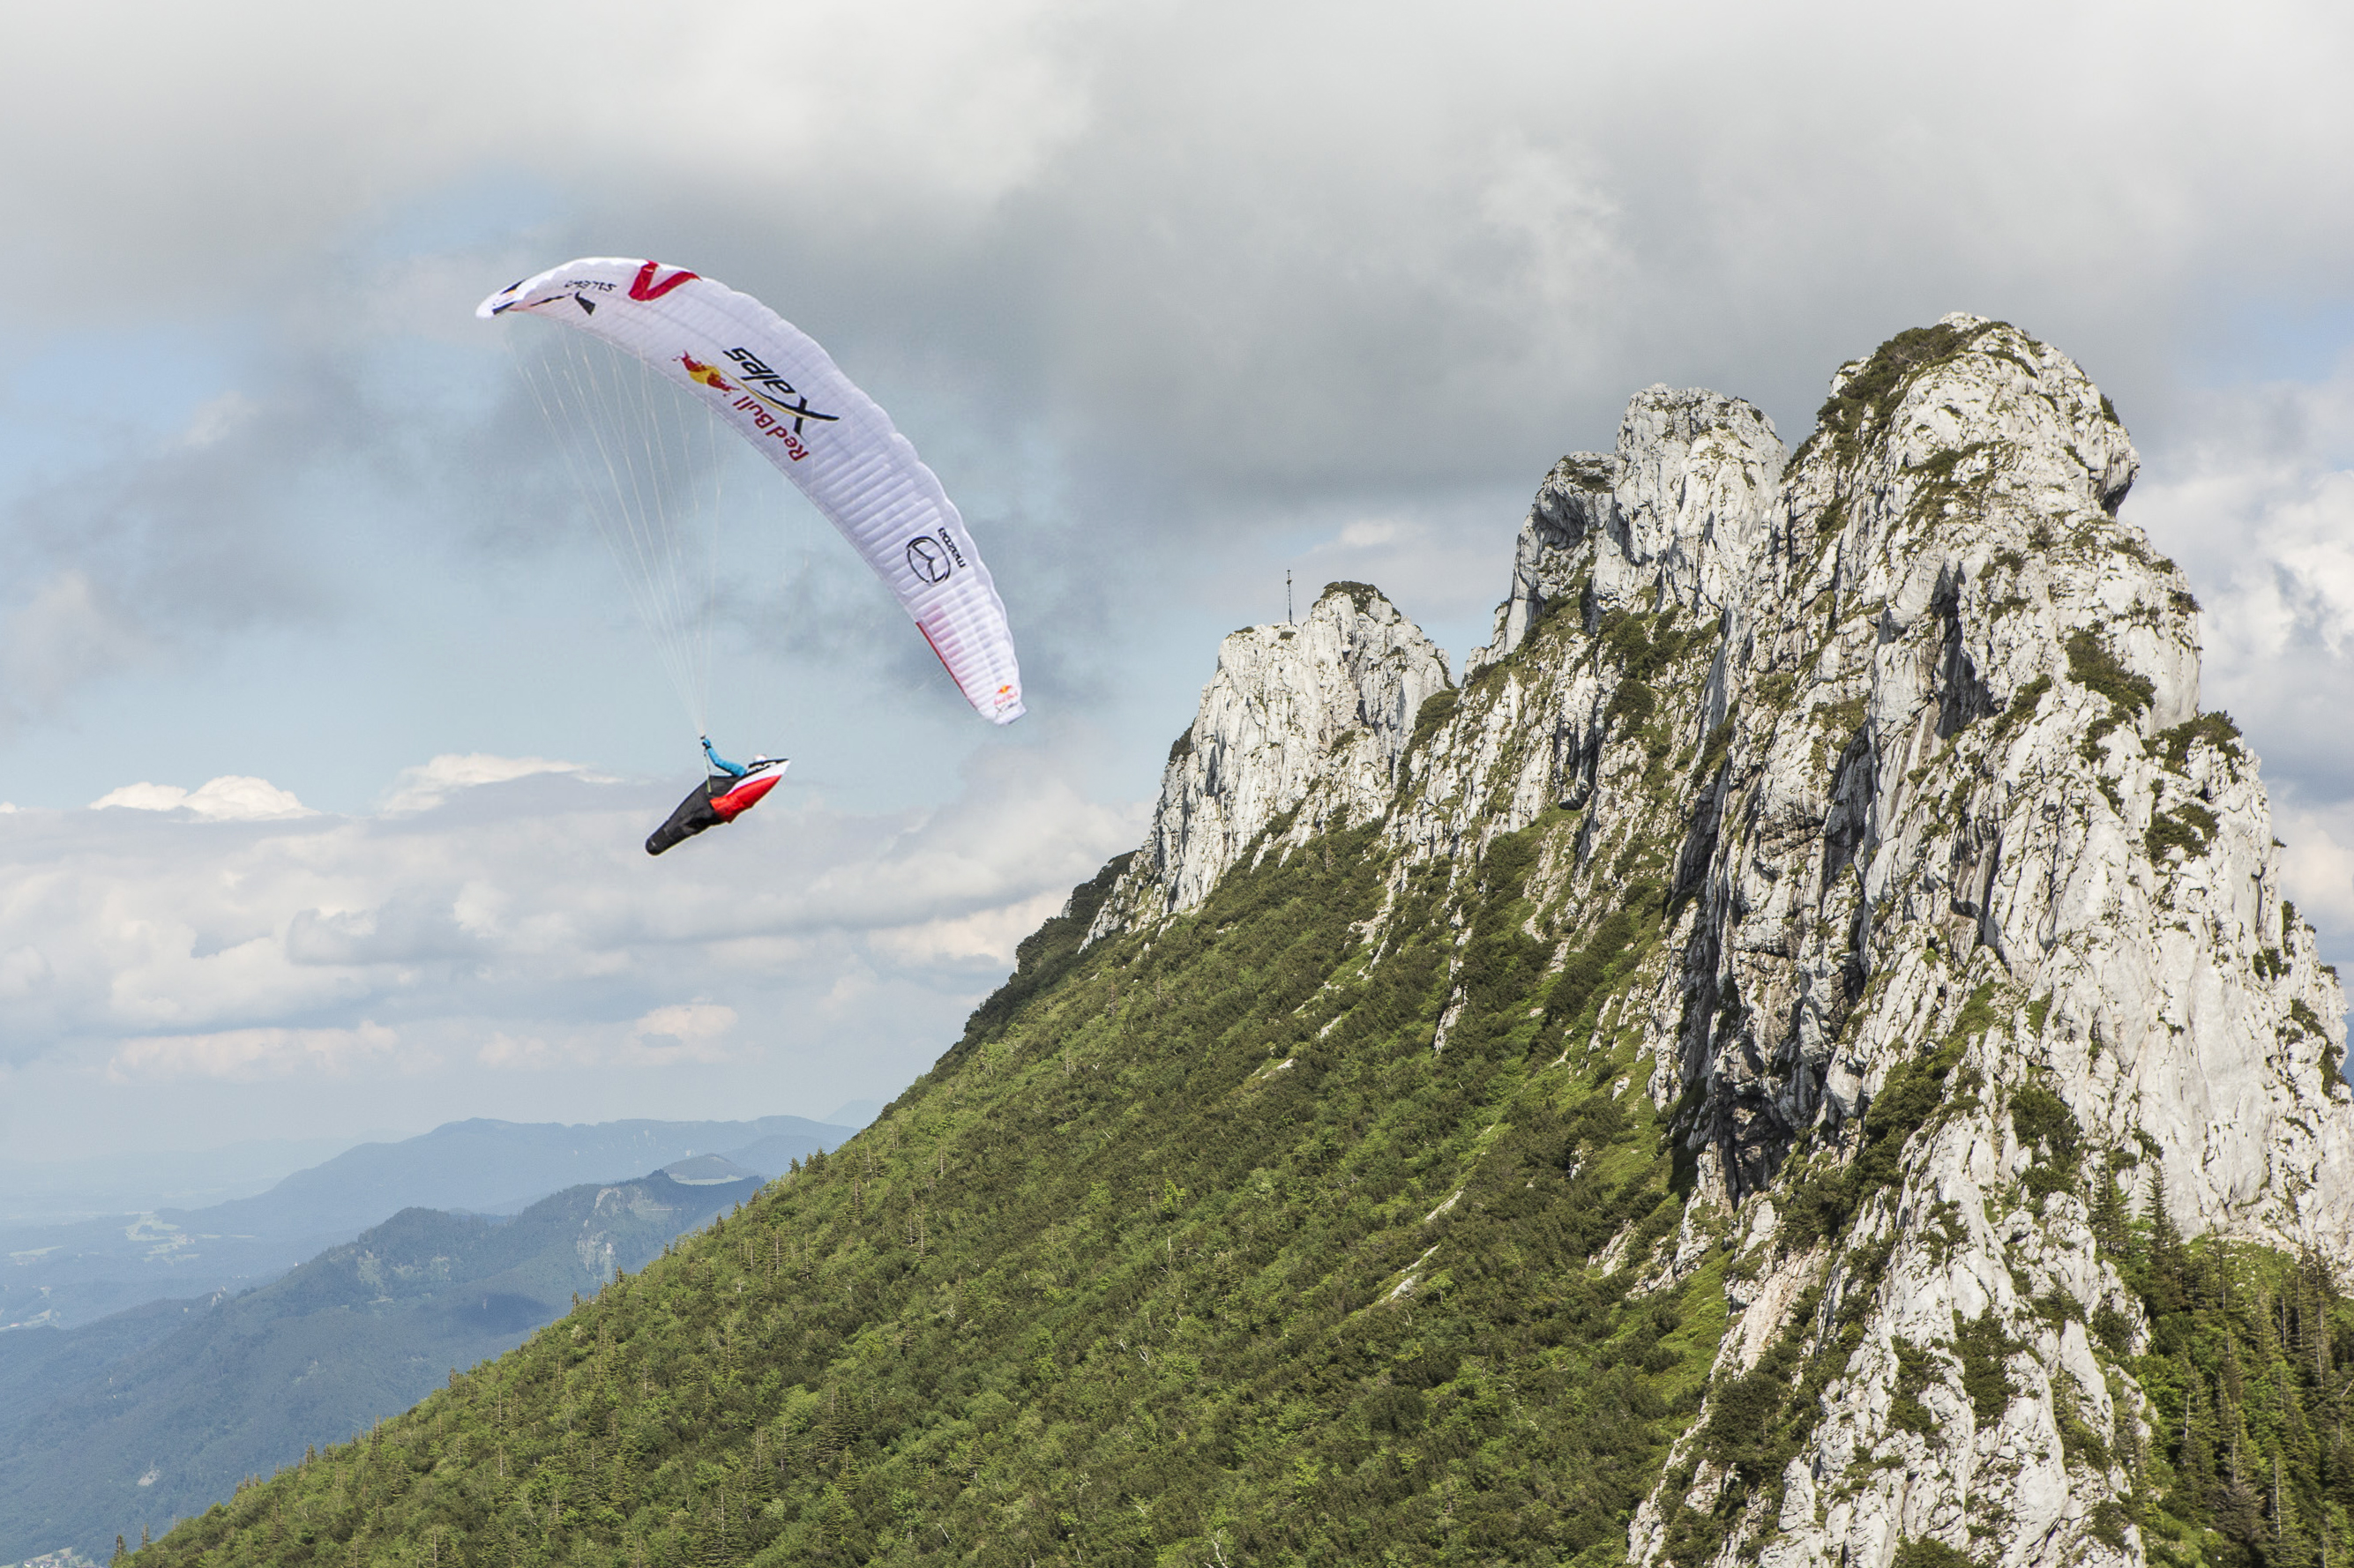 Across the Alps by paraglider and on foot – an extreme challenge both for the athletes and their equipment. Photo courtesy skywalk.